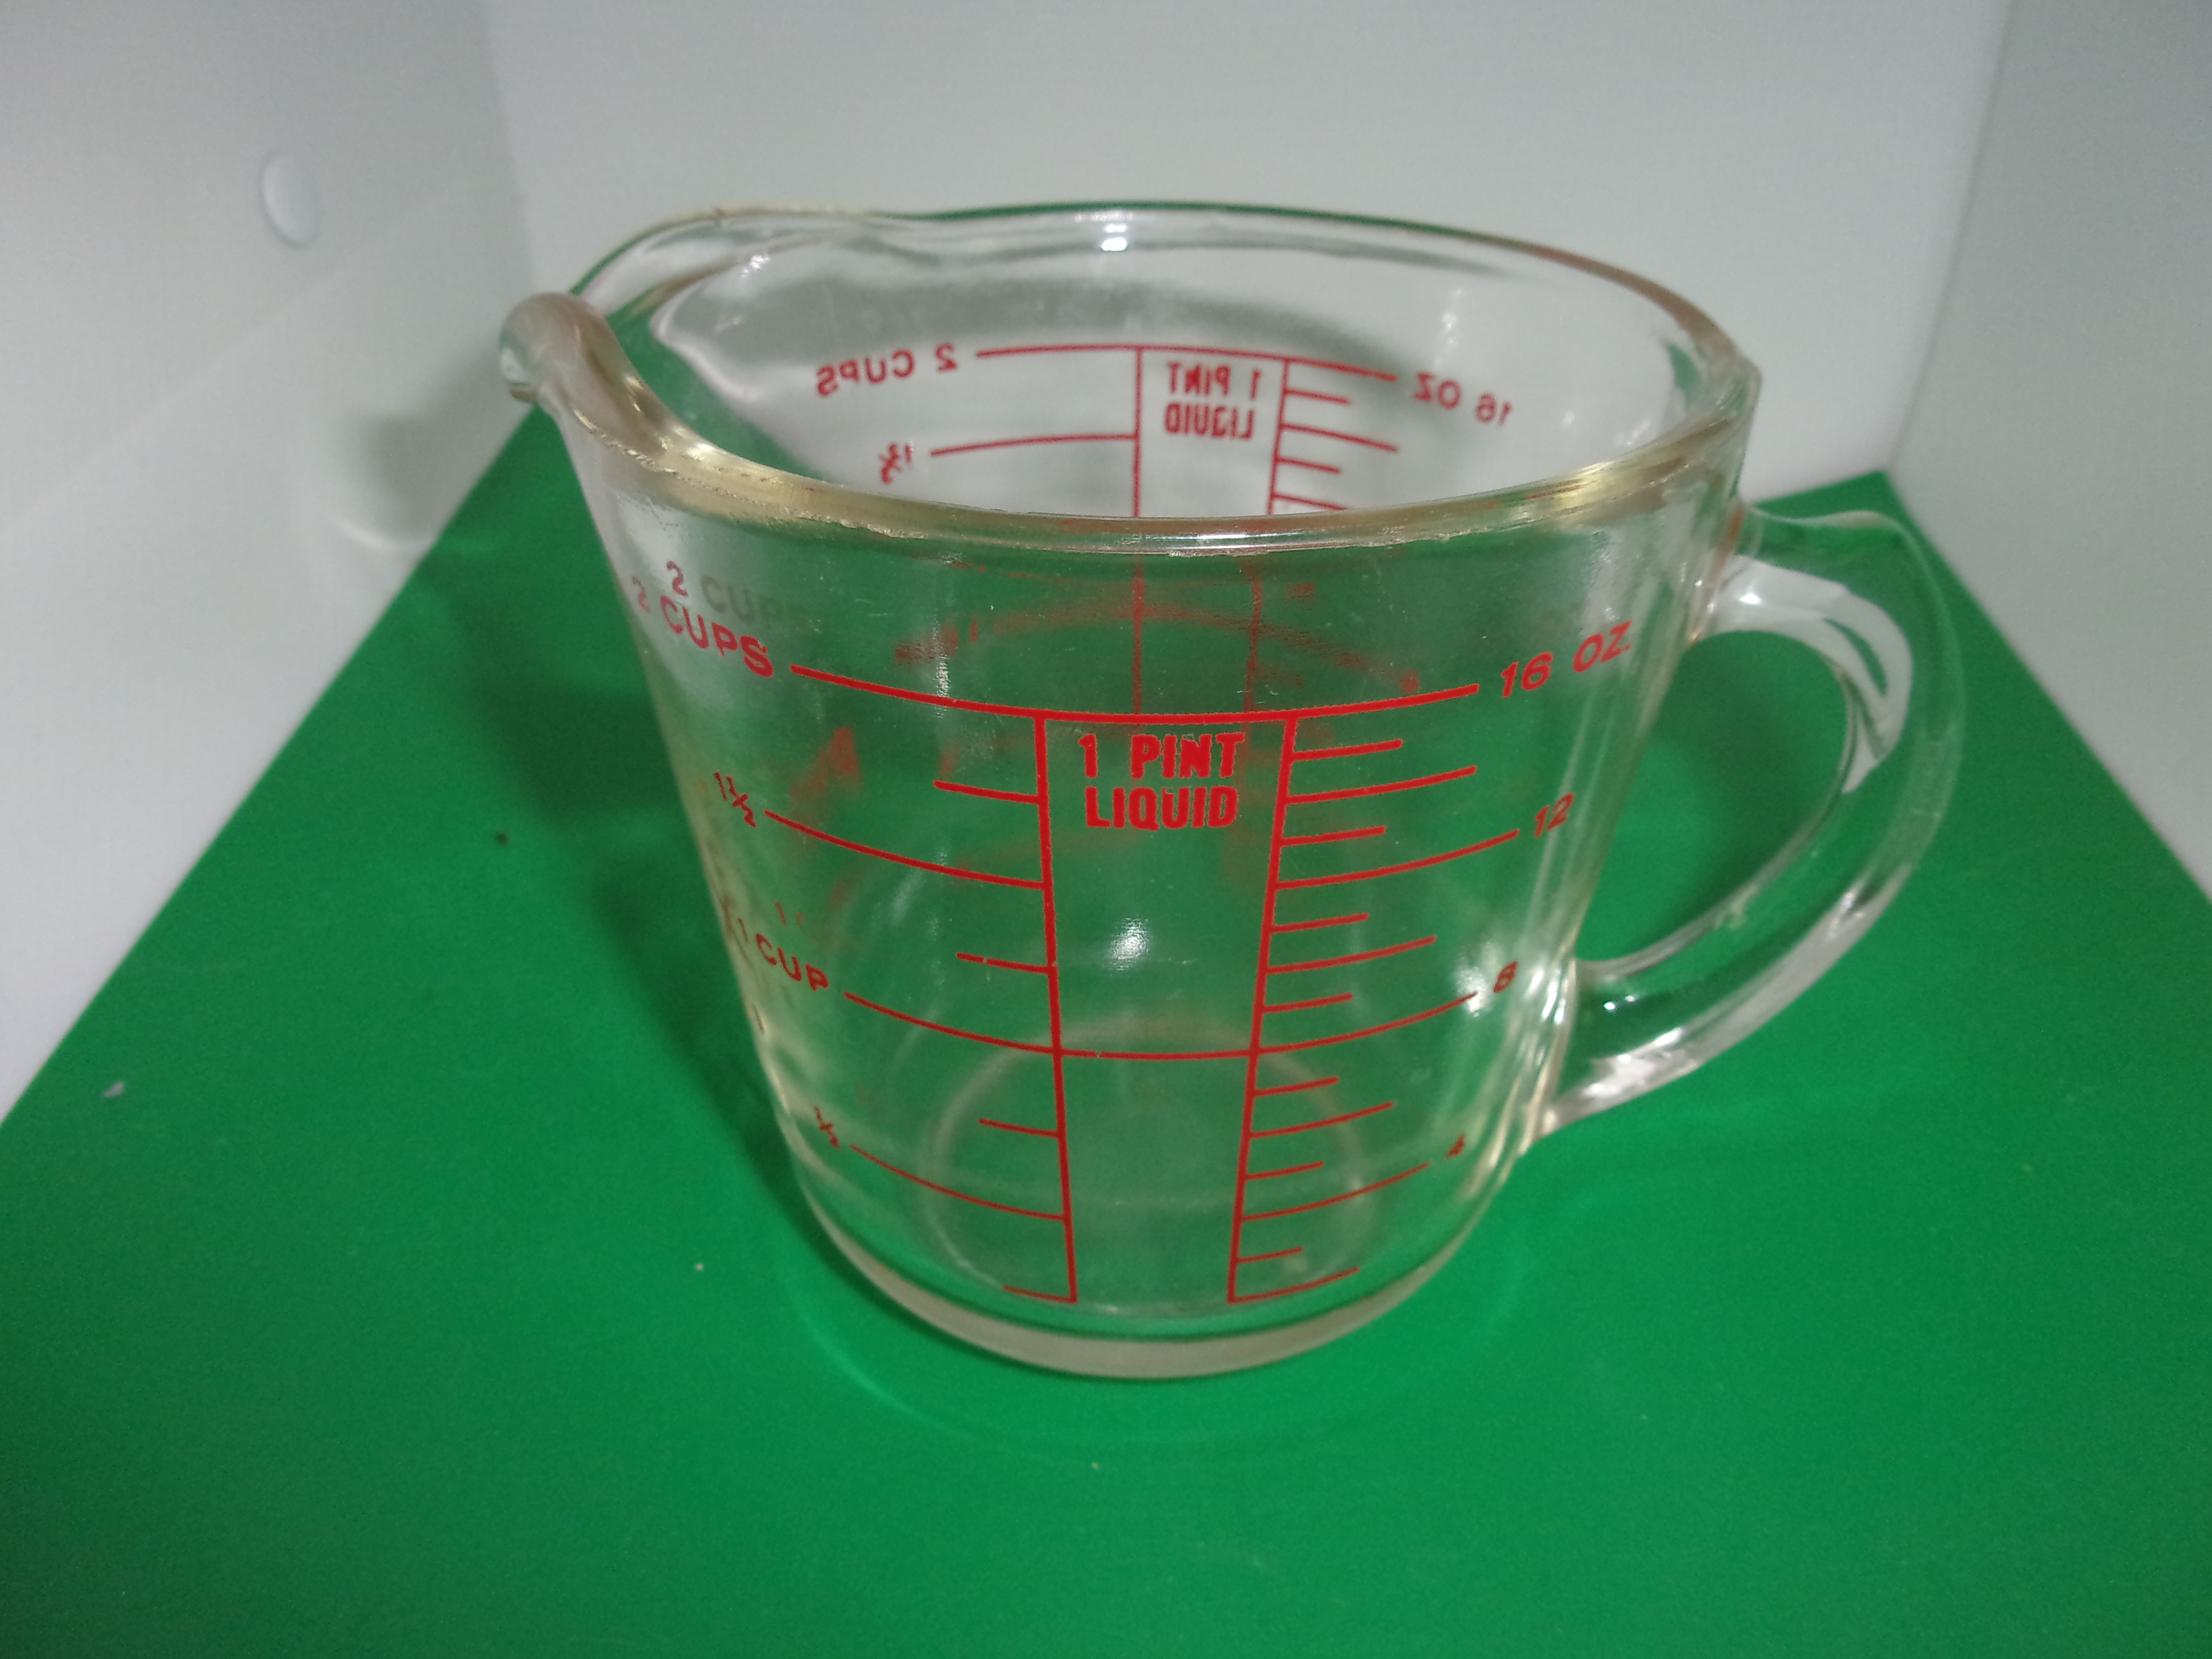 Measuring cup - Pyrex - thick glass model with size markings